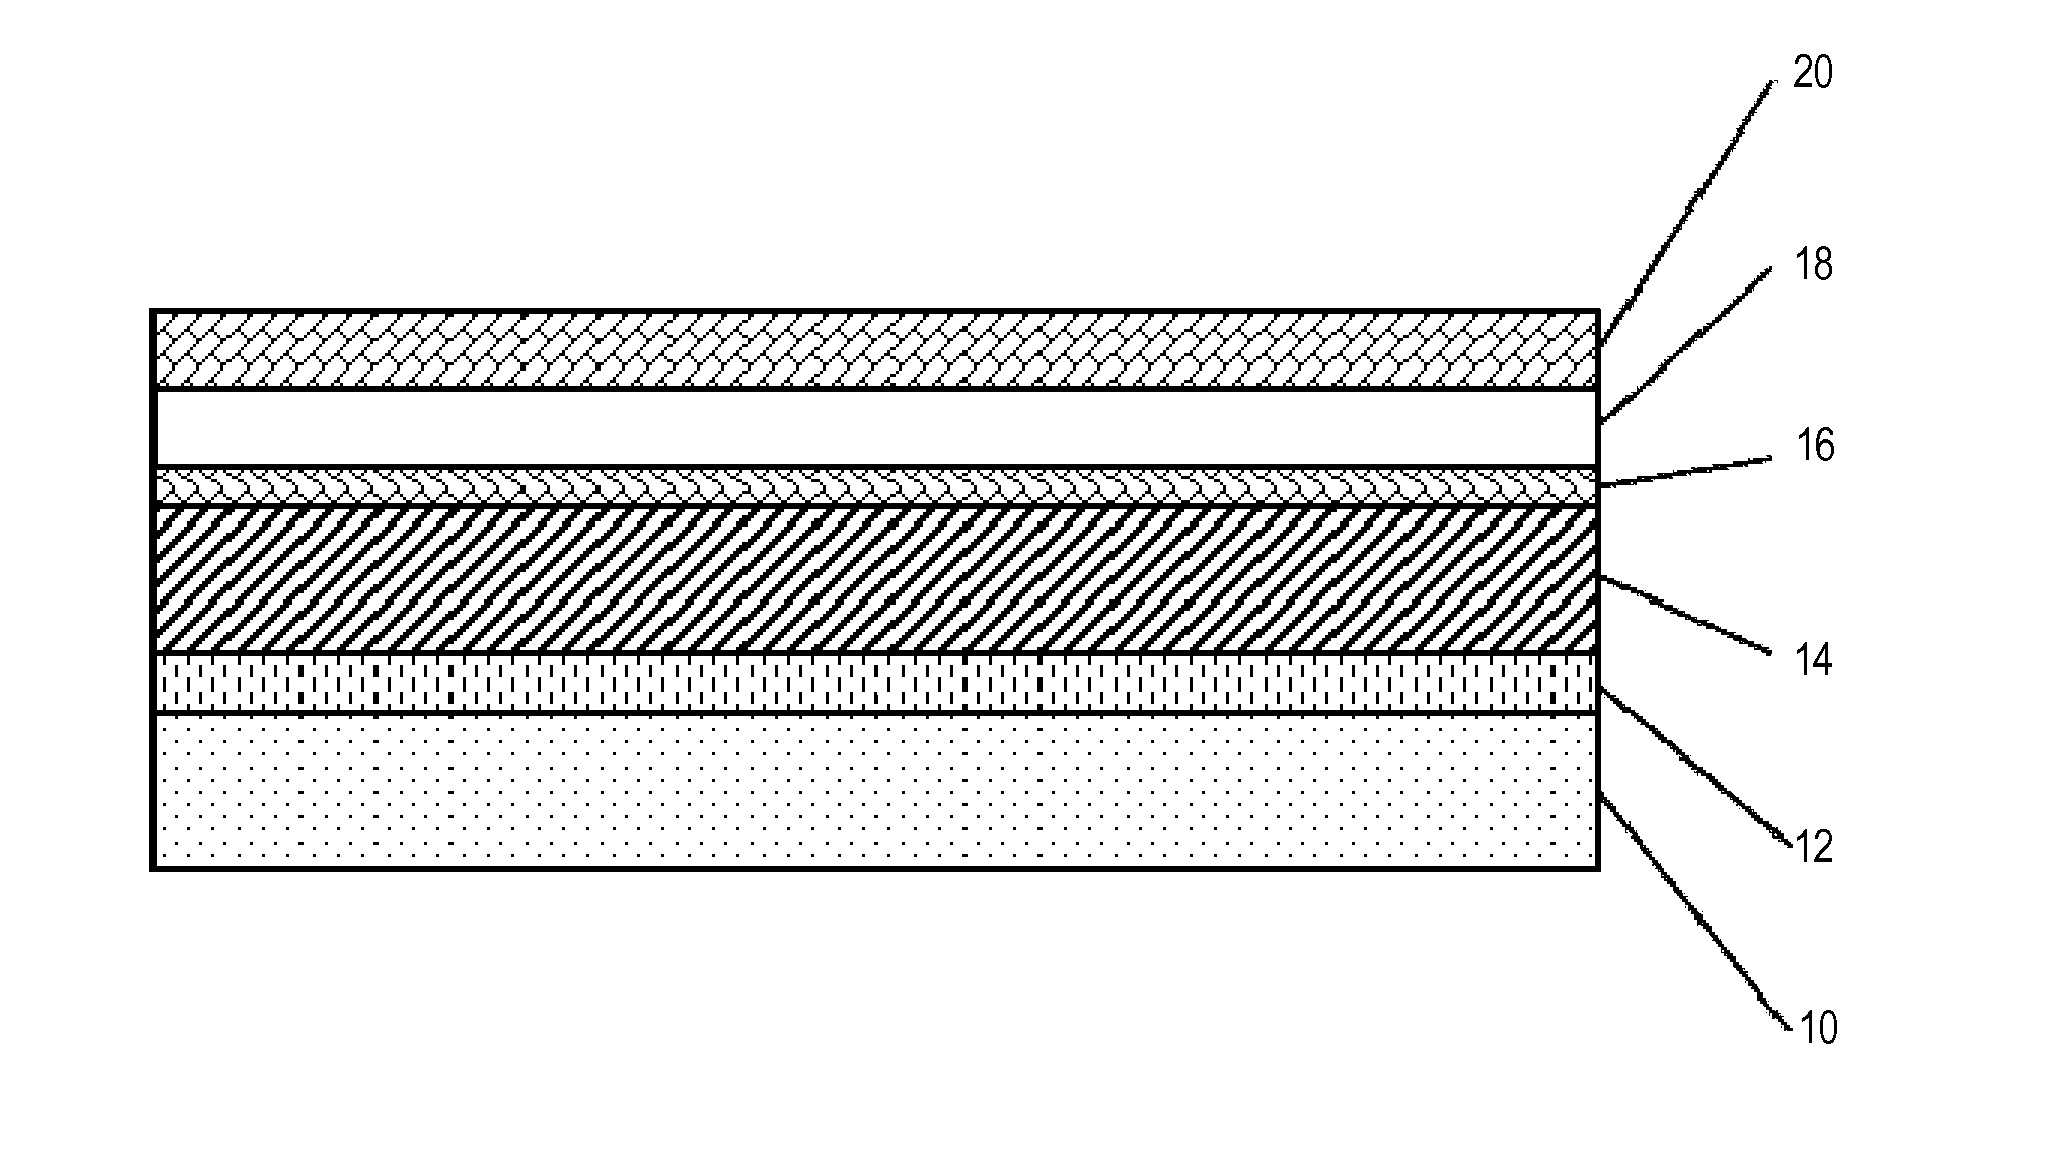 Lithographic printing plate comprising a laminated substrate